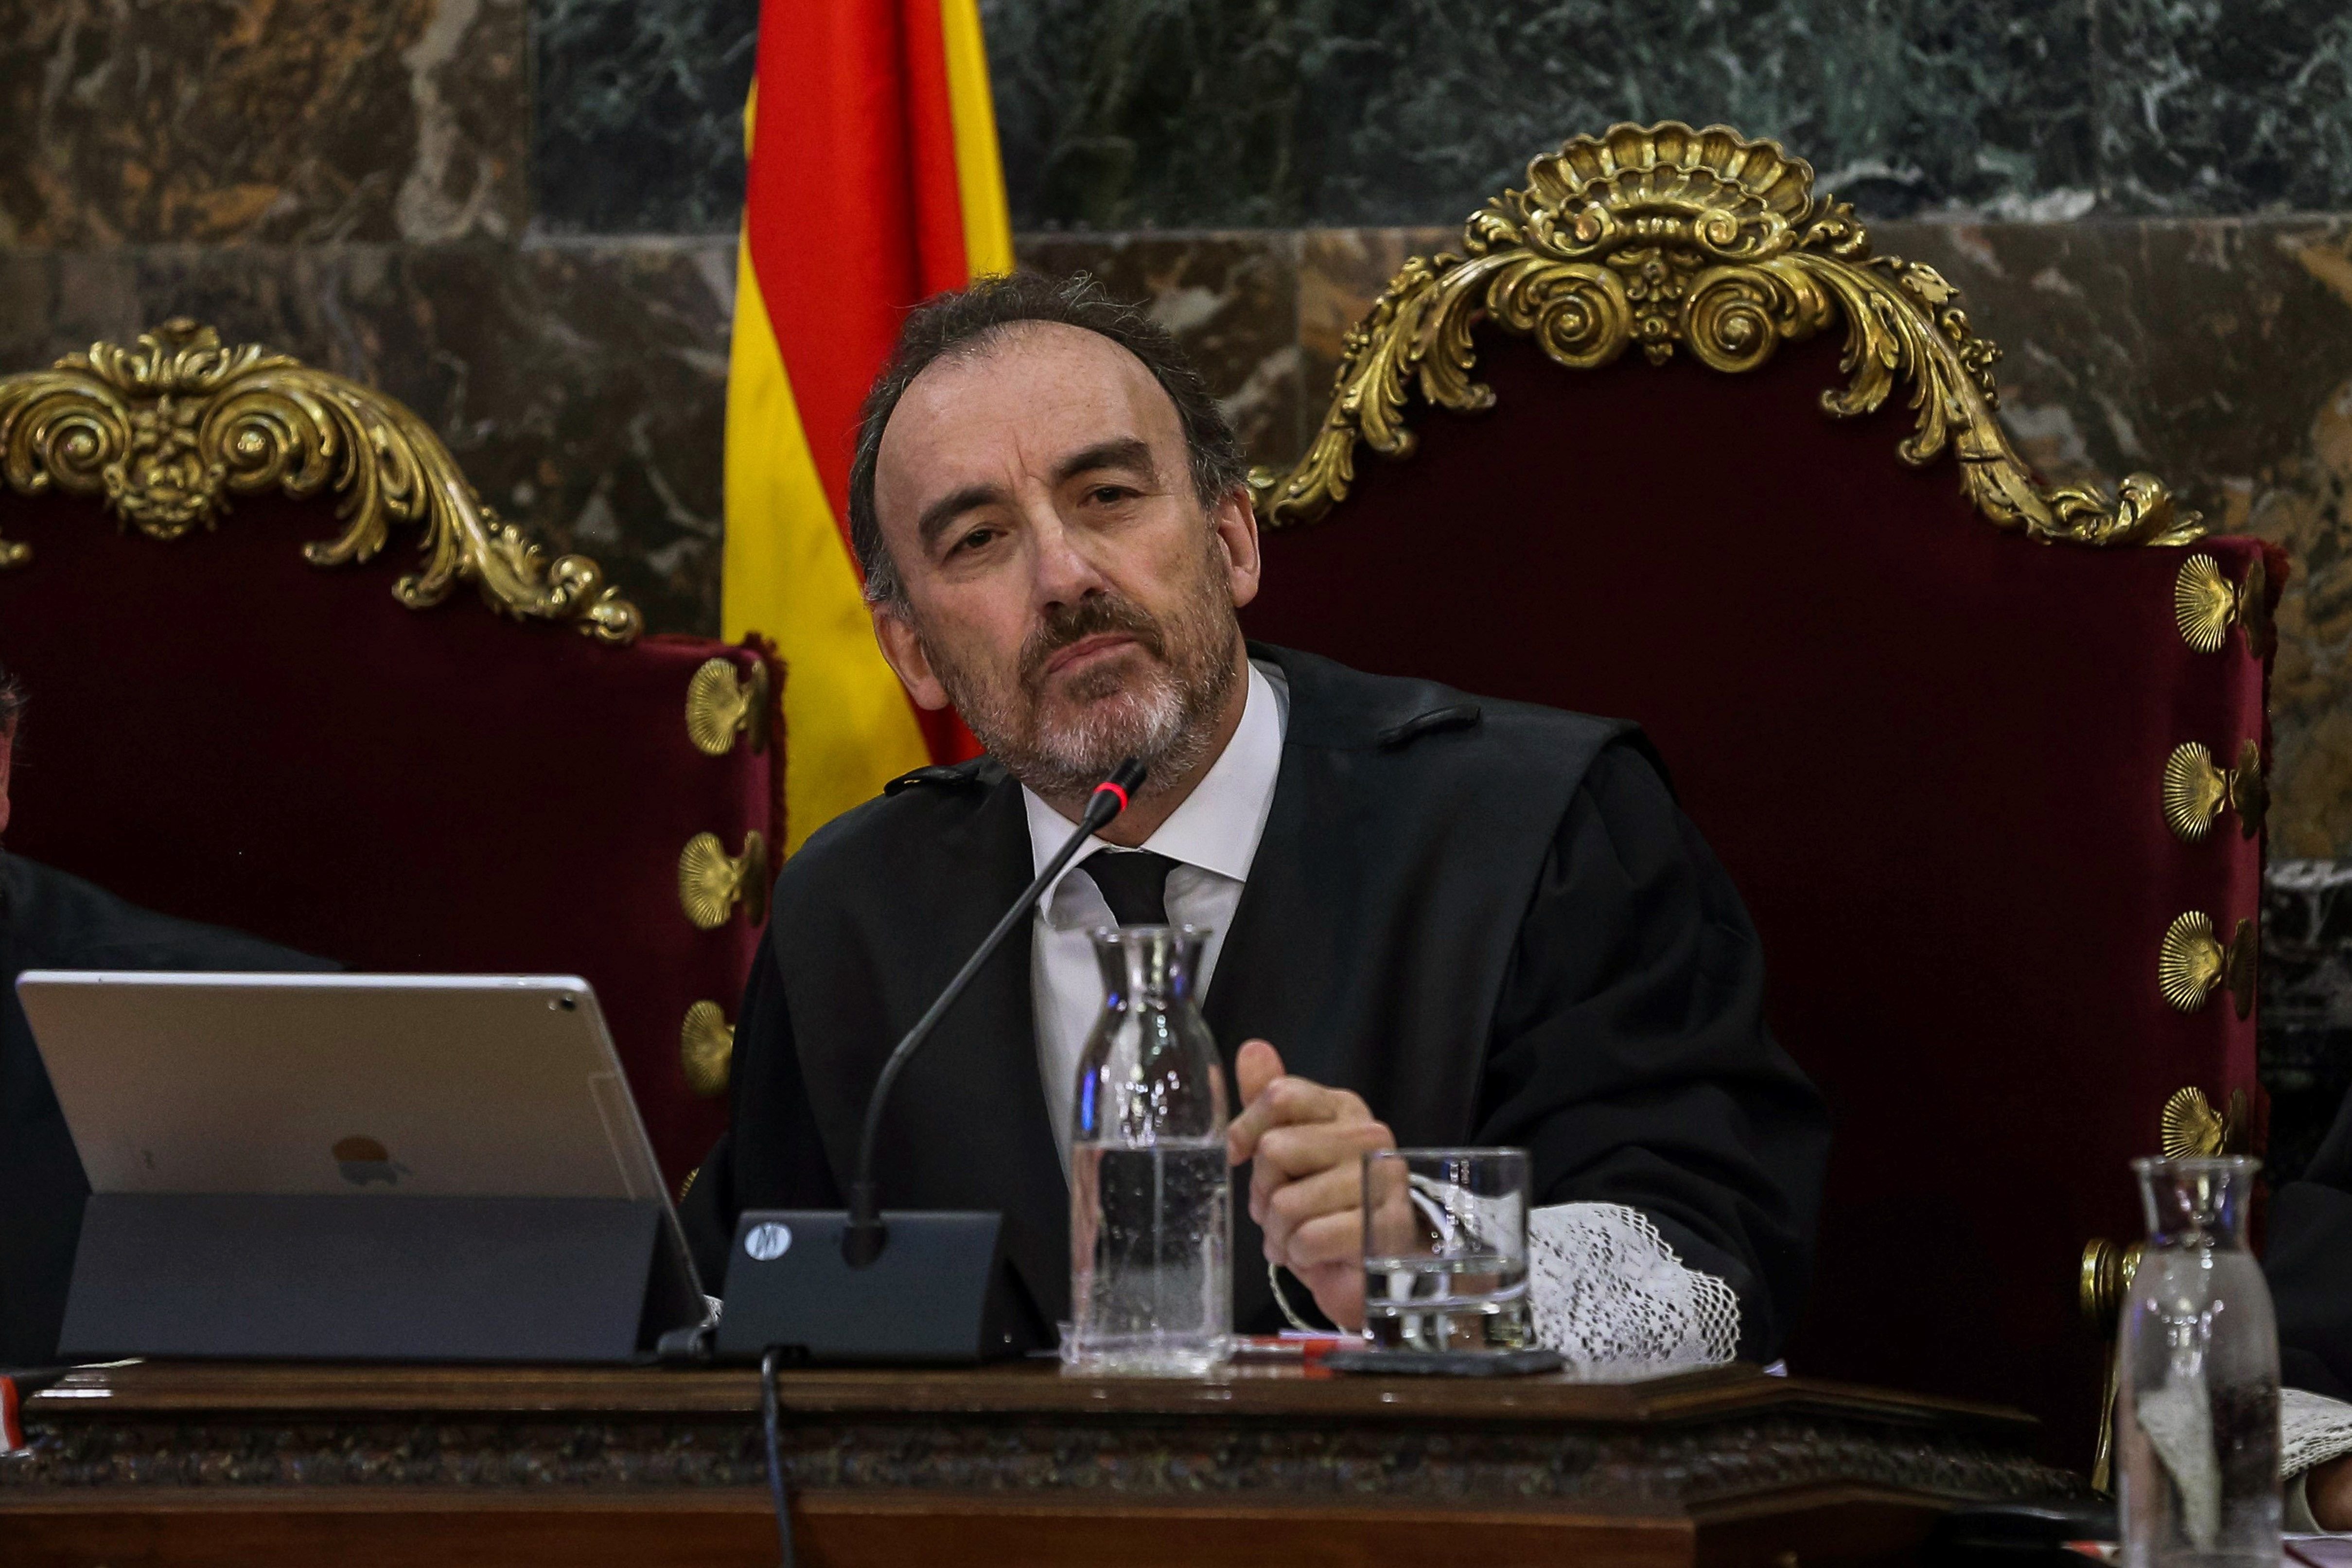 Severe critique for judge Marchena's sentencing of the Catalan leaders' trial